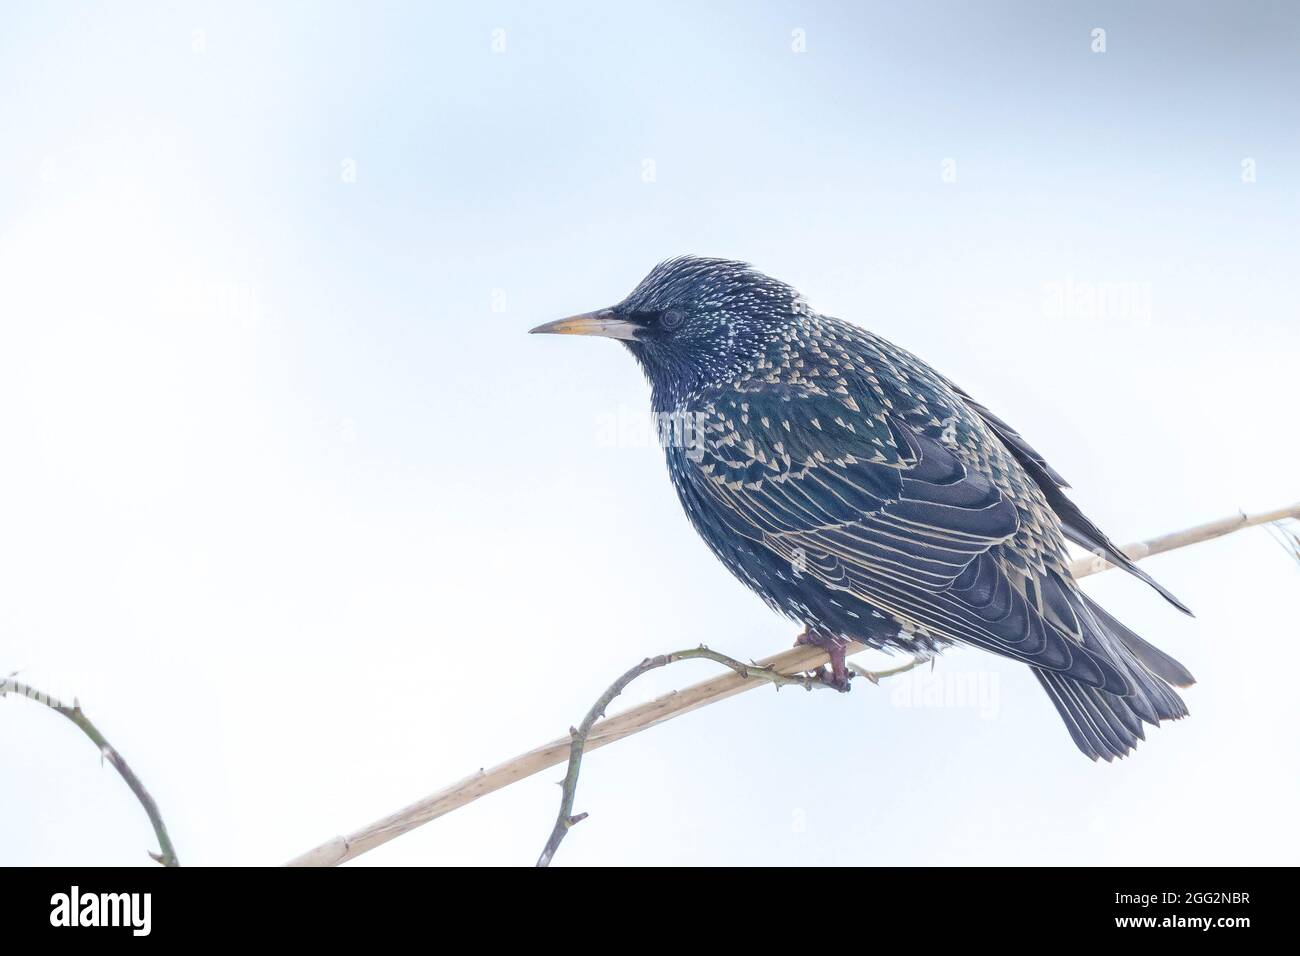 Male common starling bird Sturnus vulgaris with beautiful plumage perched at early morning sunrise. Stock Photo